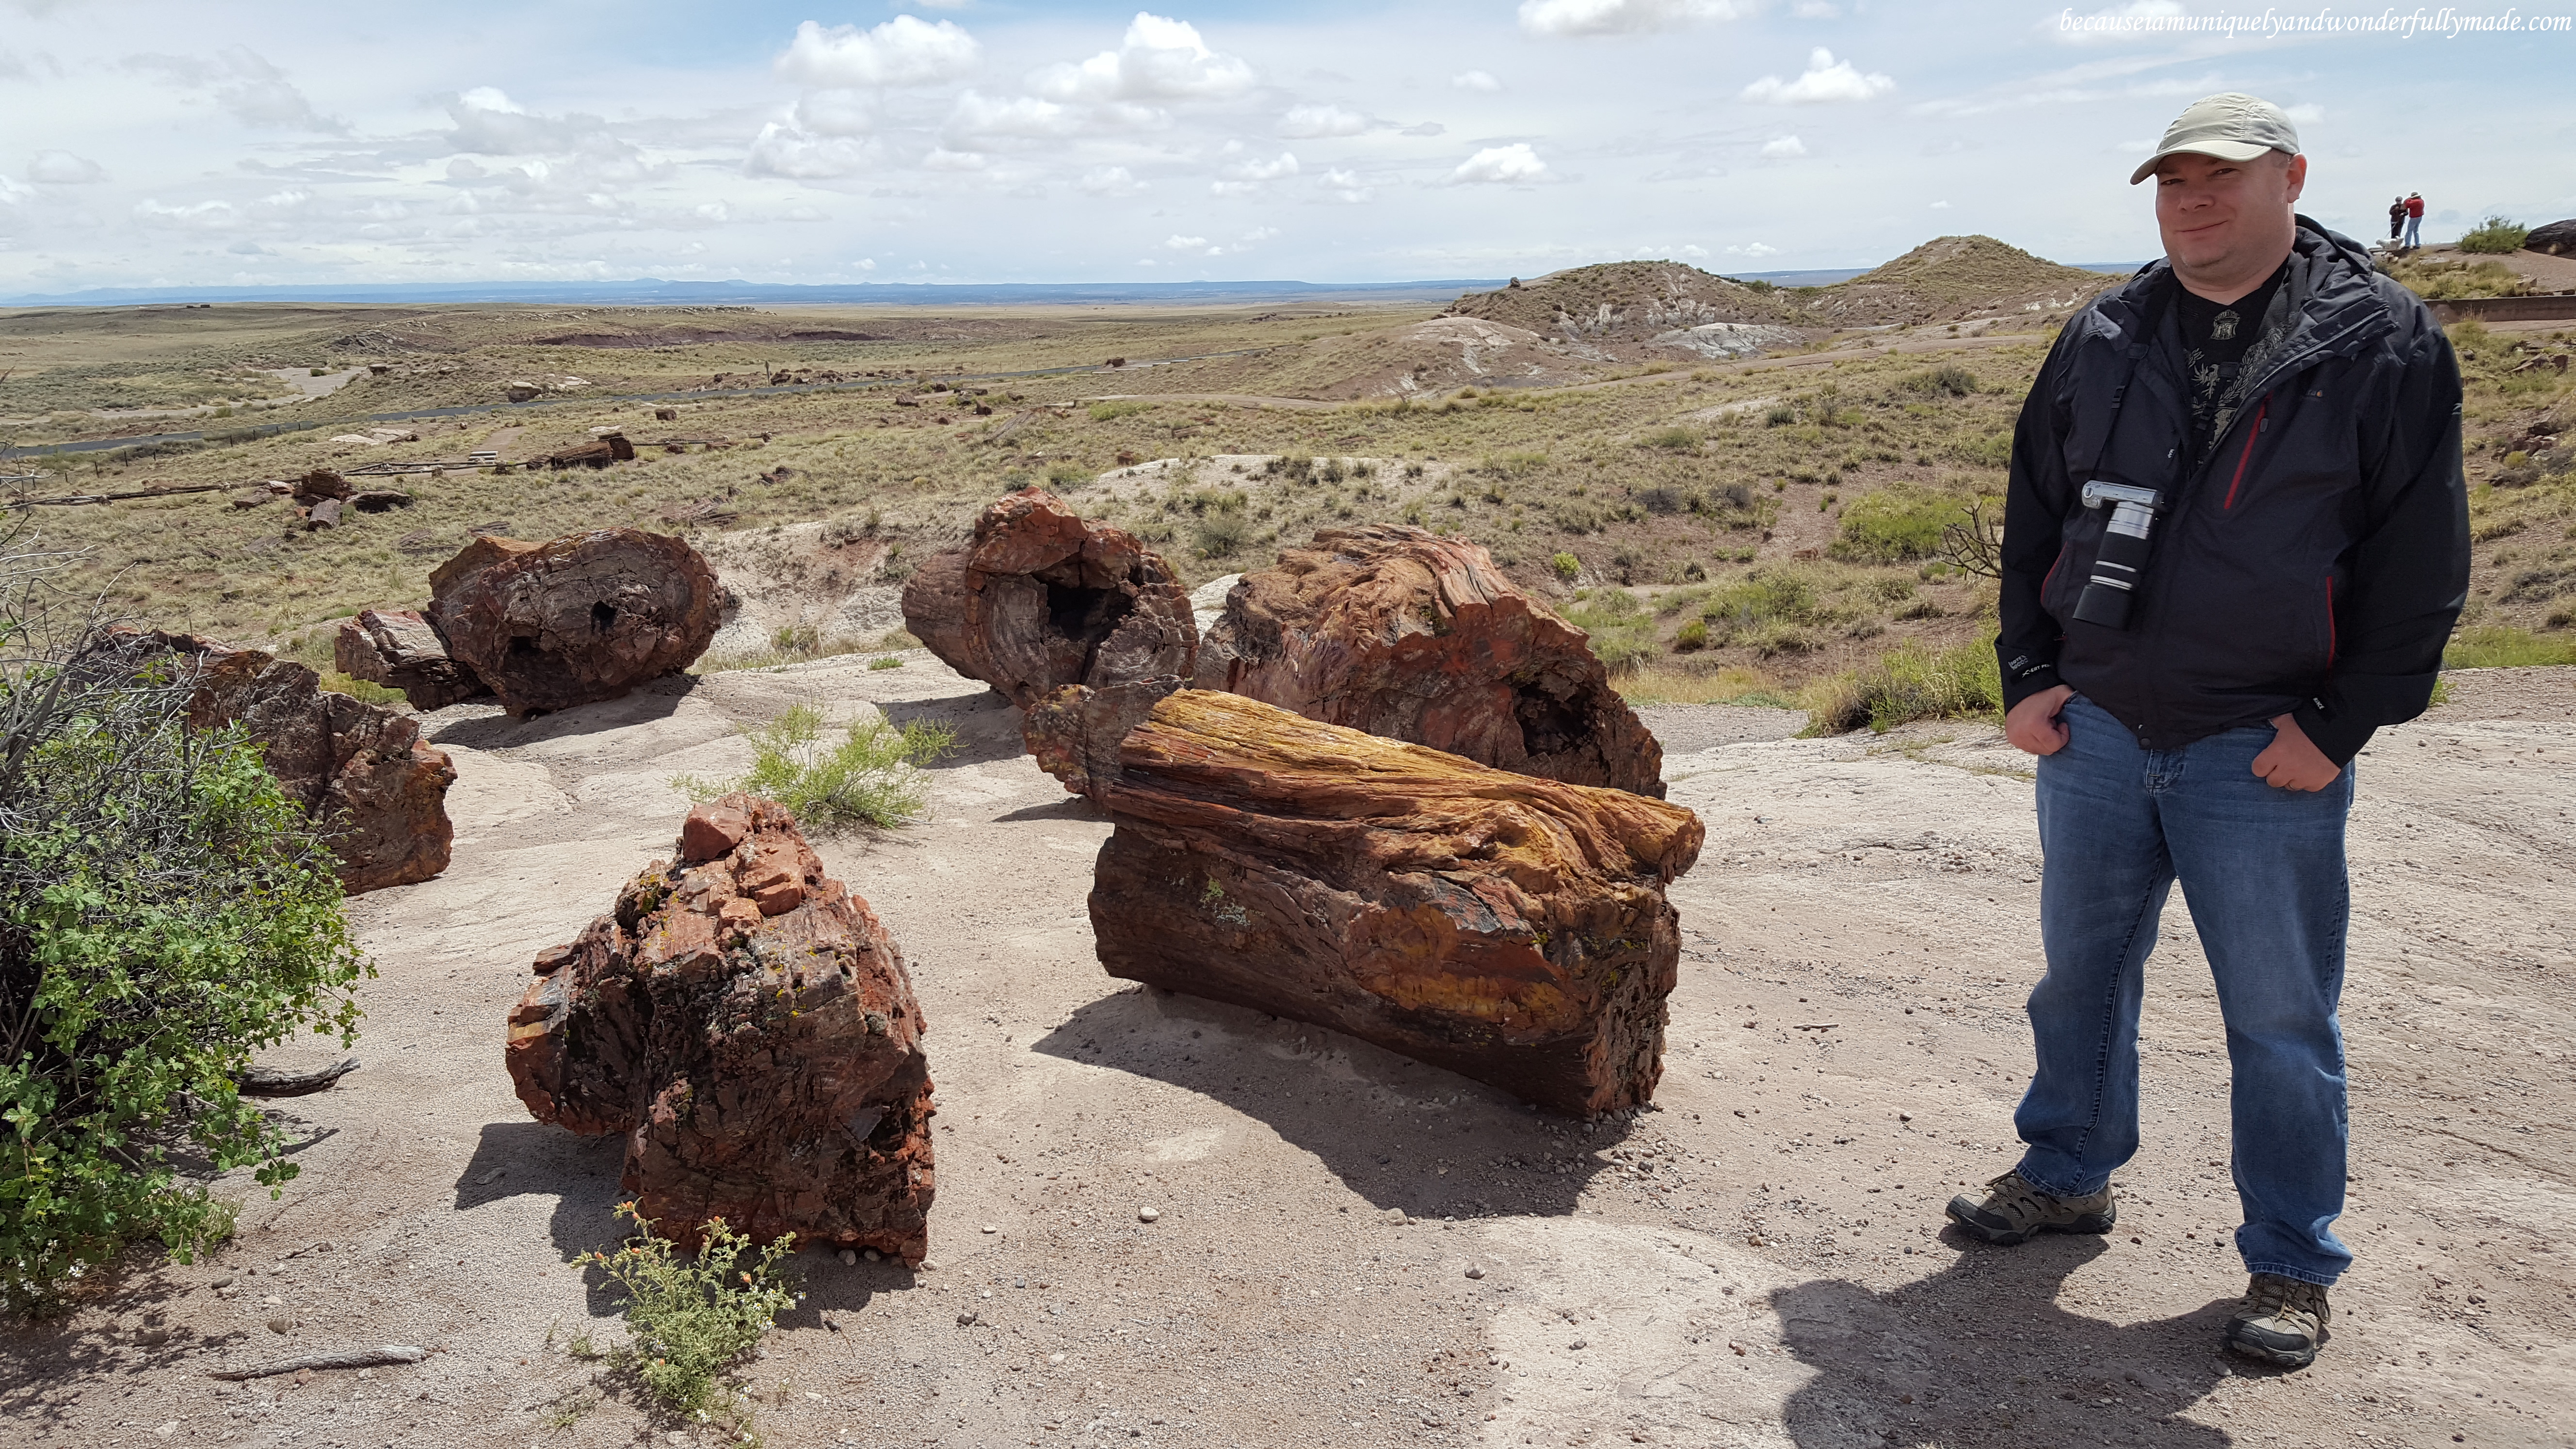 Visitors can get up close and personal to the fossilized giant logs at Giant Logs trail in Petrified Forest National Park in Arizona.